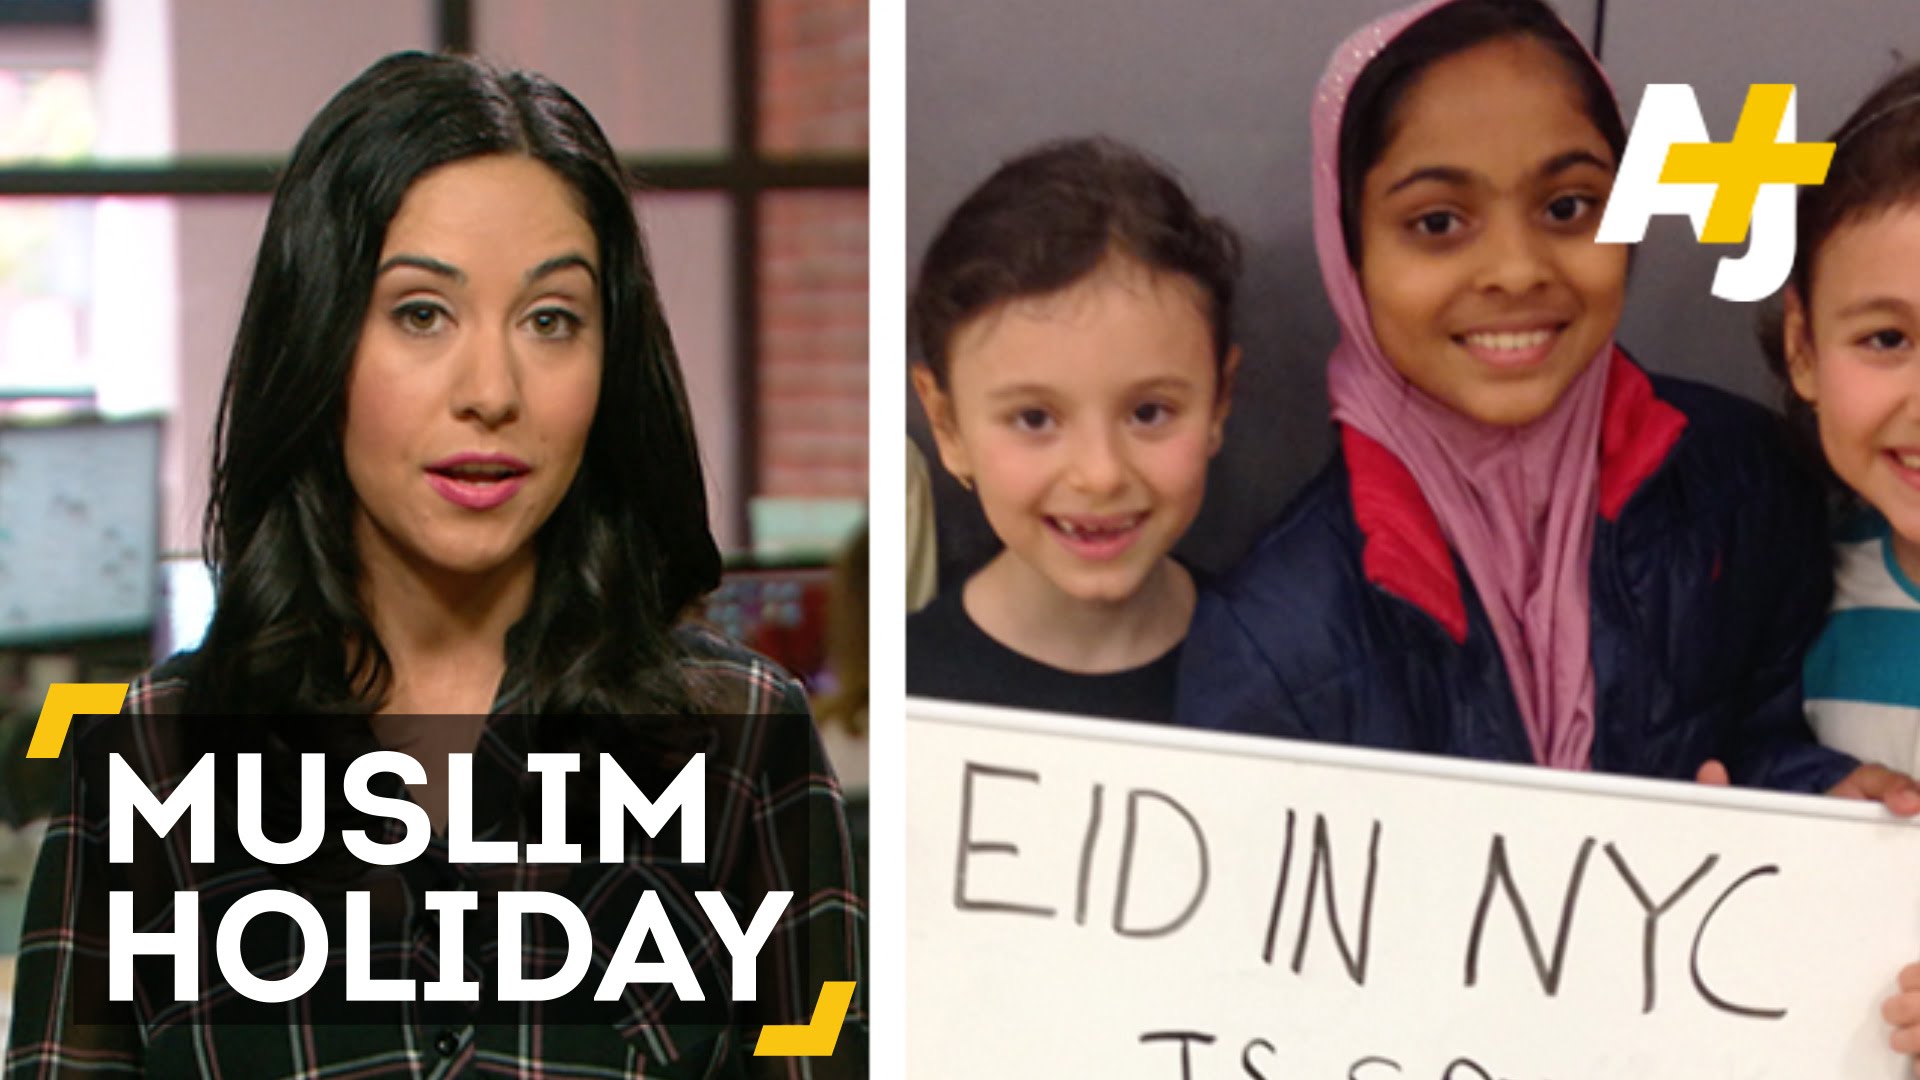 A First: New York City Schools close for Muslim Holy Day